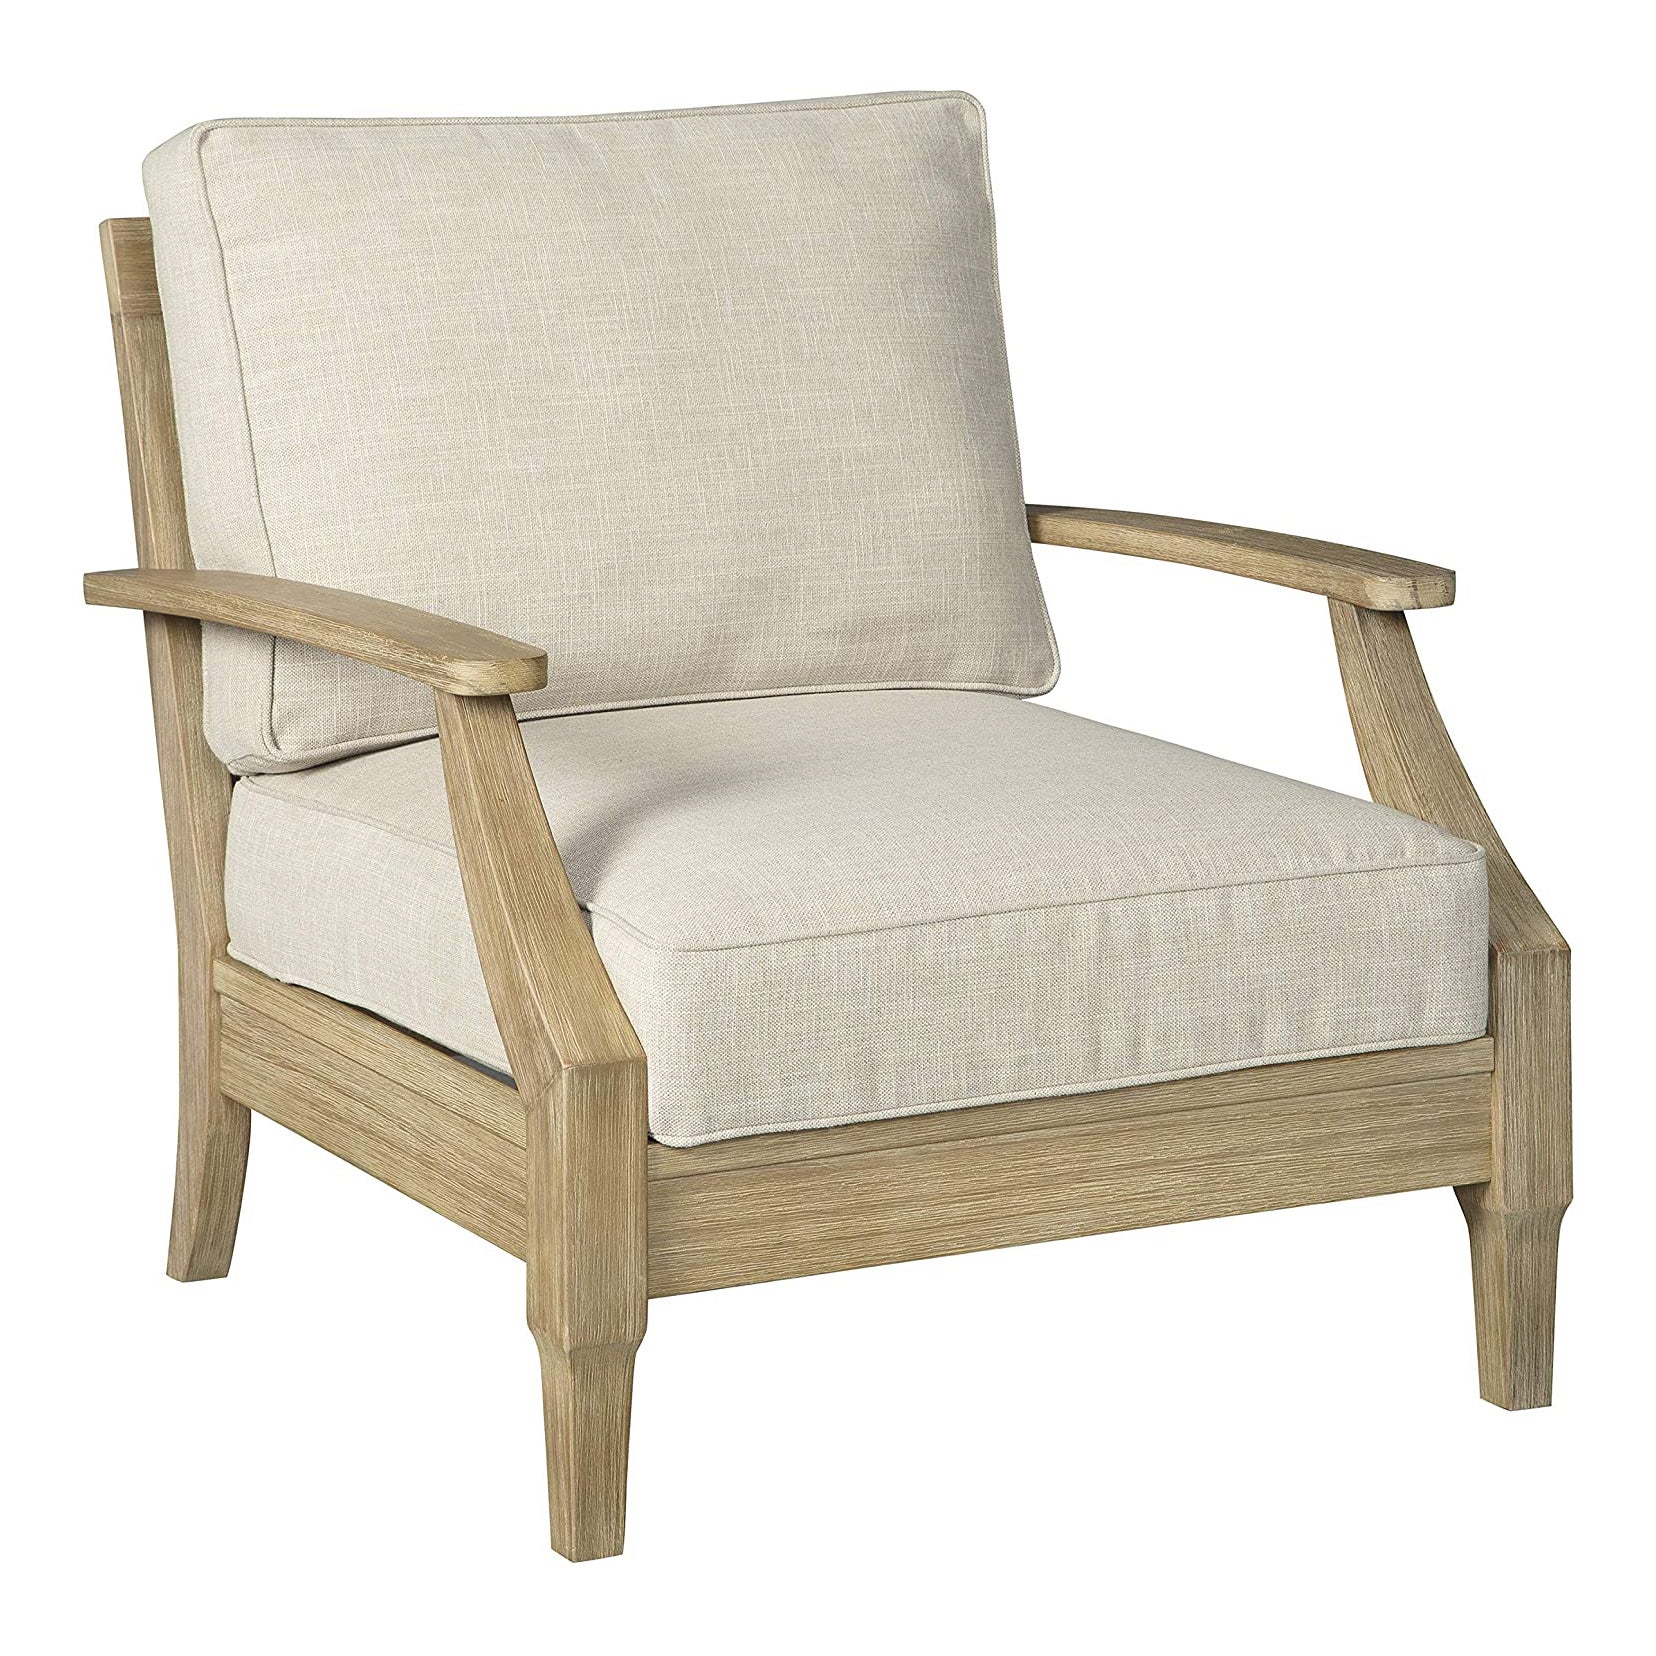 Signature Design by Ashley Clare view Outdoor Eucalyptus Wood Lounge Chair